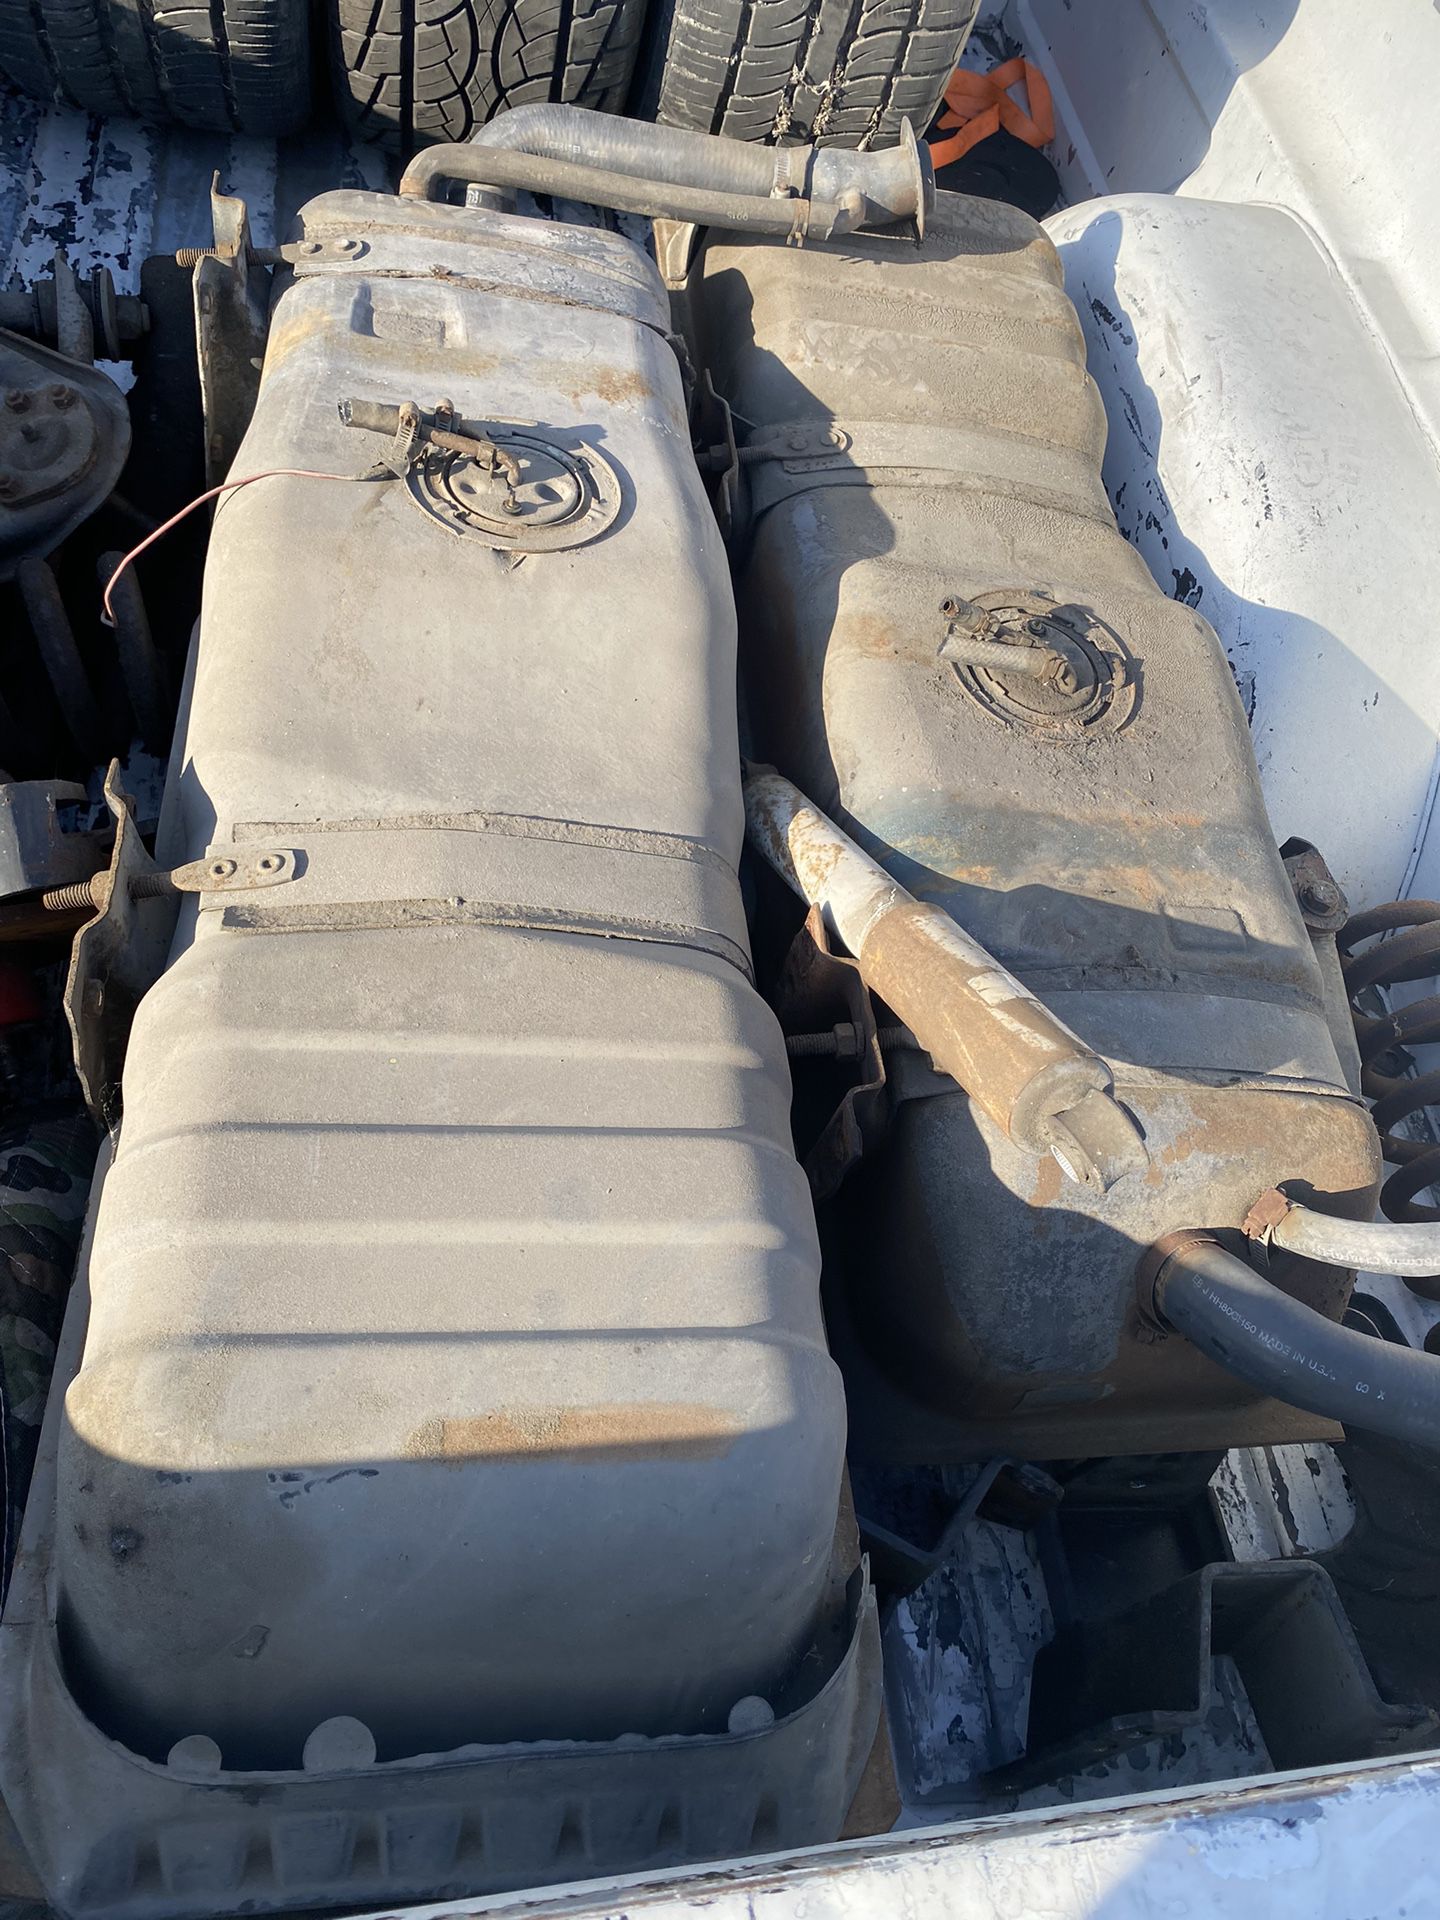 73-87 Chevy C10 Gas Tanks With Fuel Pump Oem 